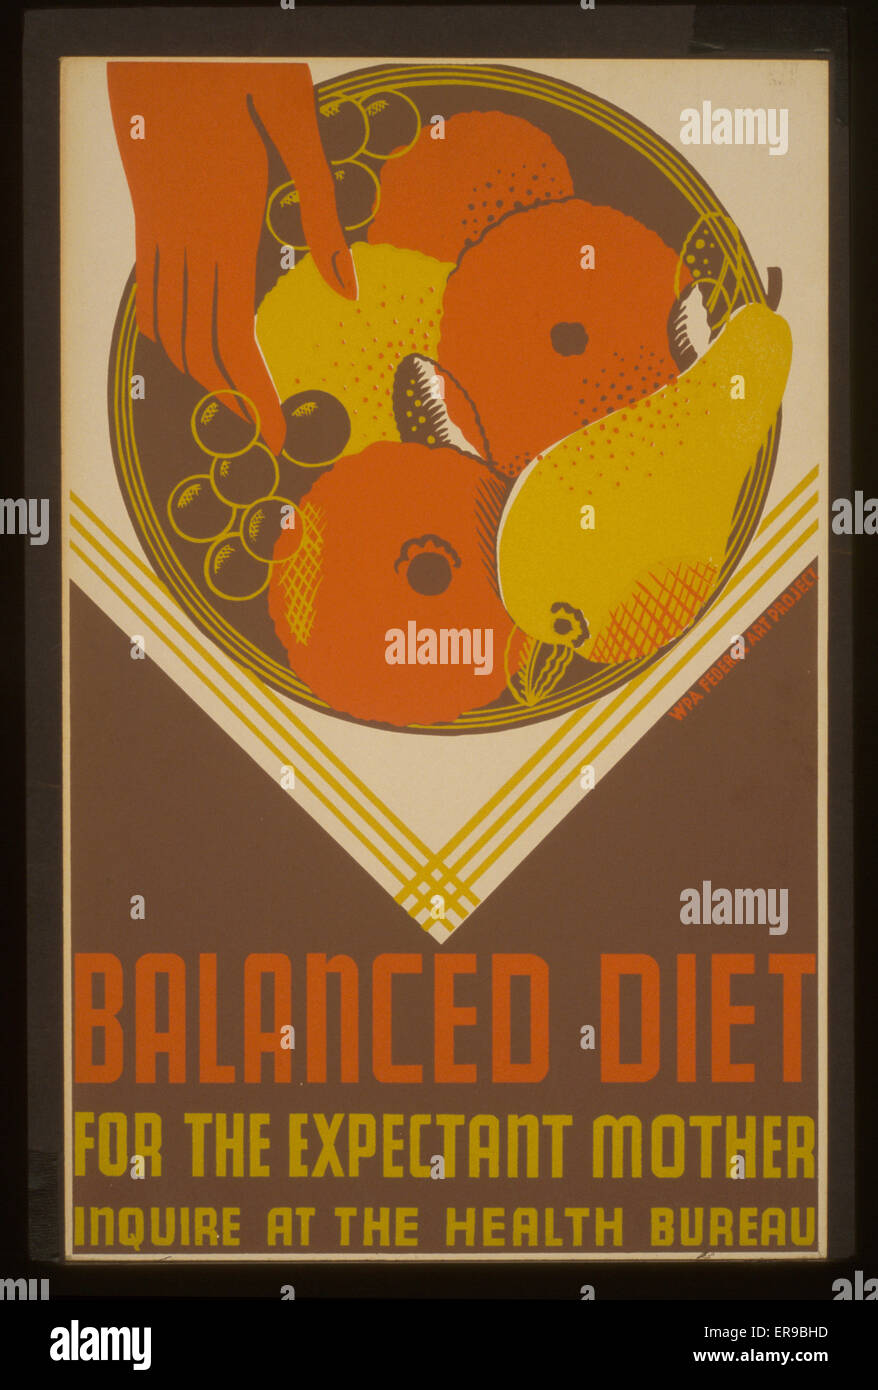 Balanced diet for the expectant mother Inquire at the Health Bureau. Poster promoting proper diet and prenatal care for pregnant women, showing a bowl of fruit. Date between 1936 and 1939. Stock Photo